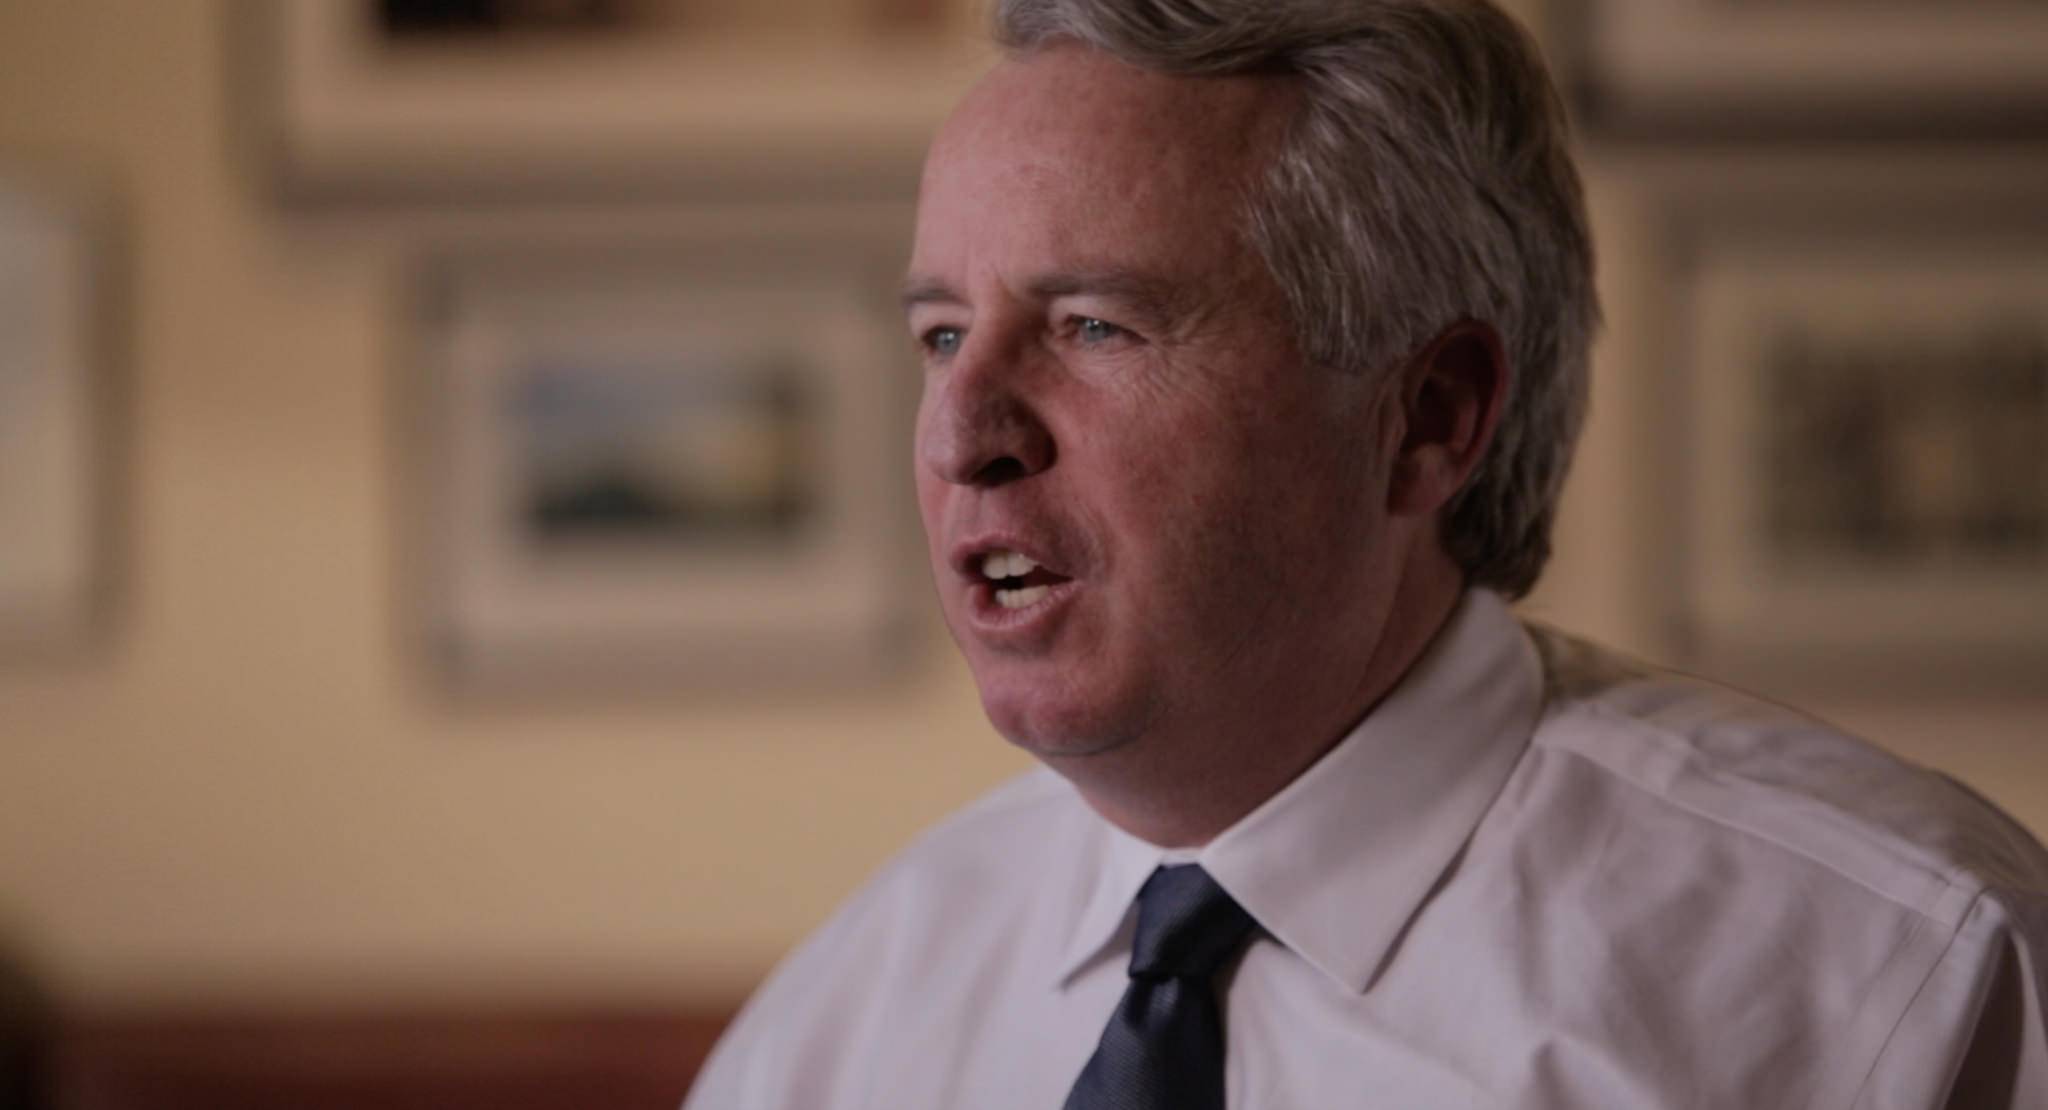 Gubernatorial candidate Chris Kennedy hosting meet and greet in Champaign this Saturday